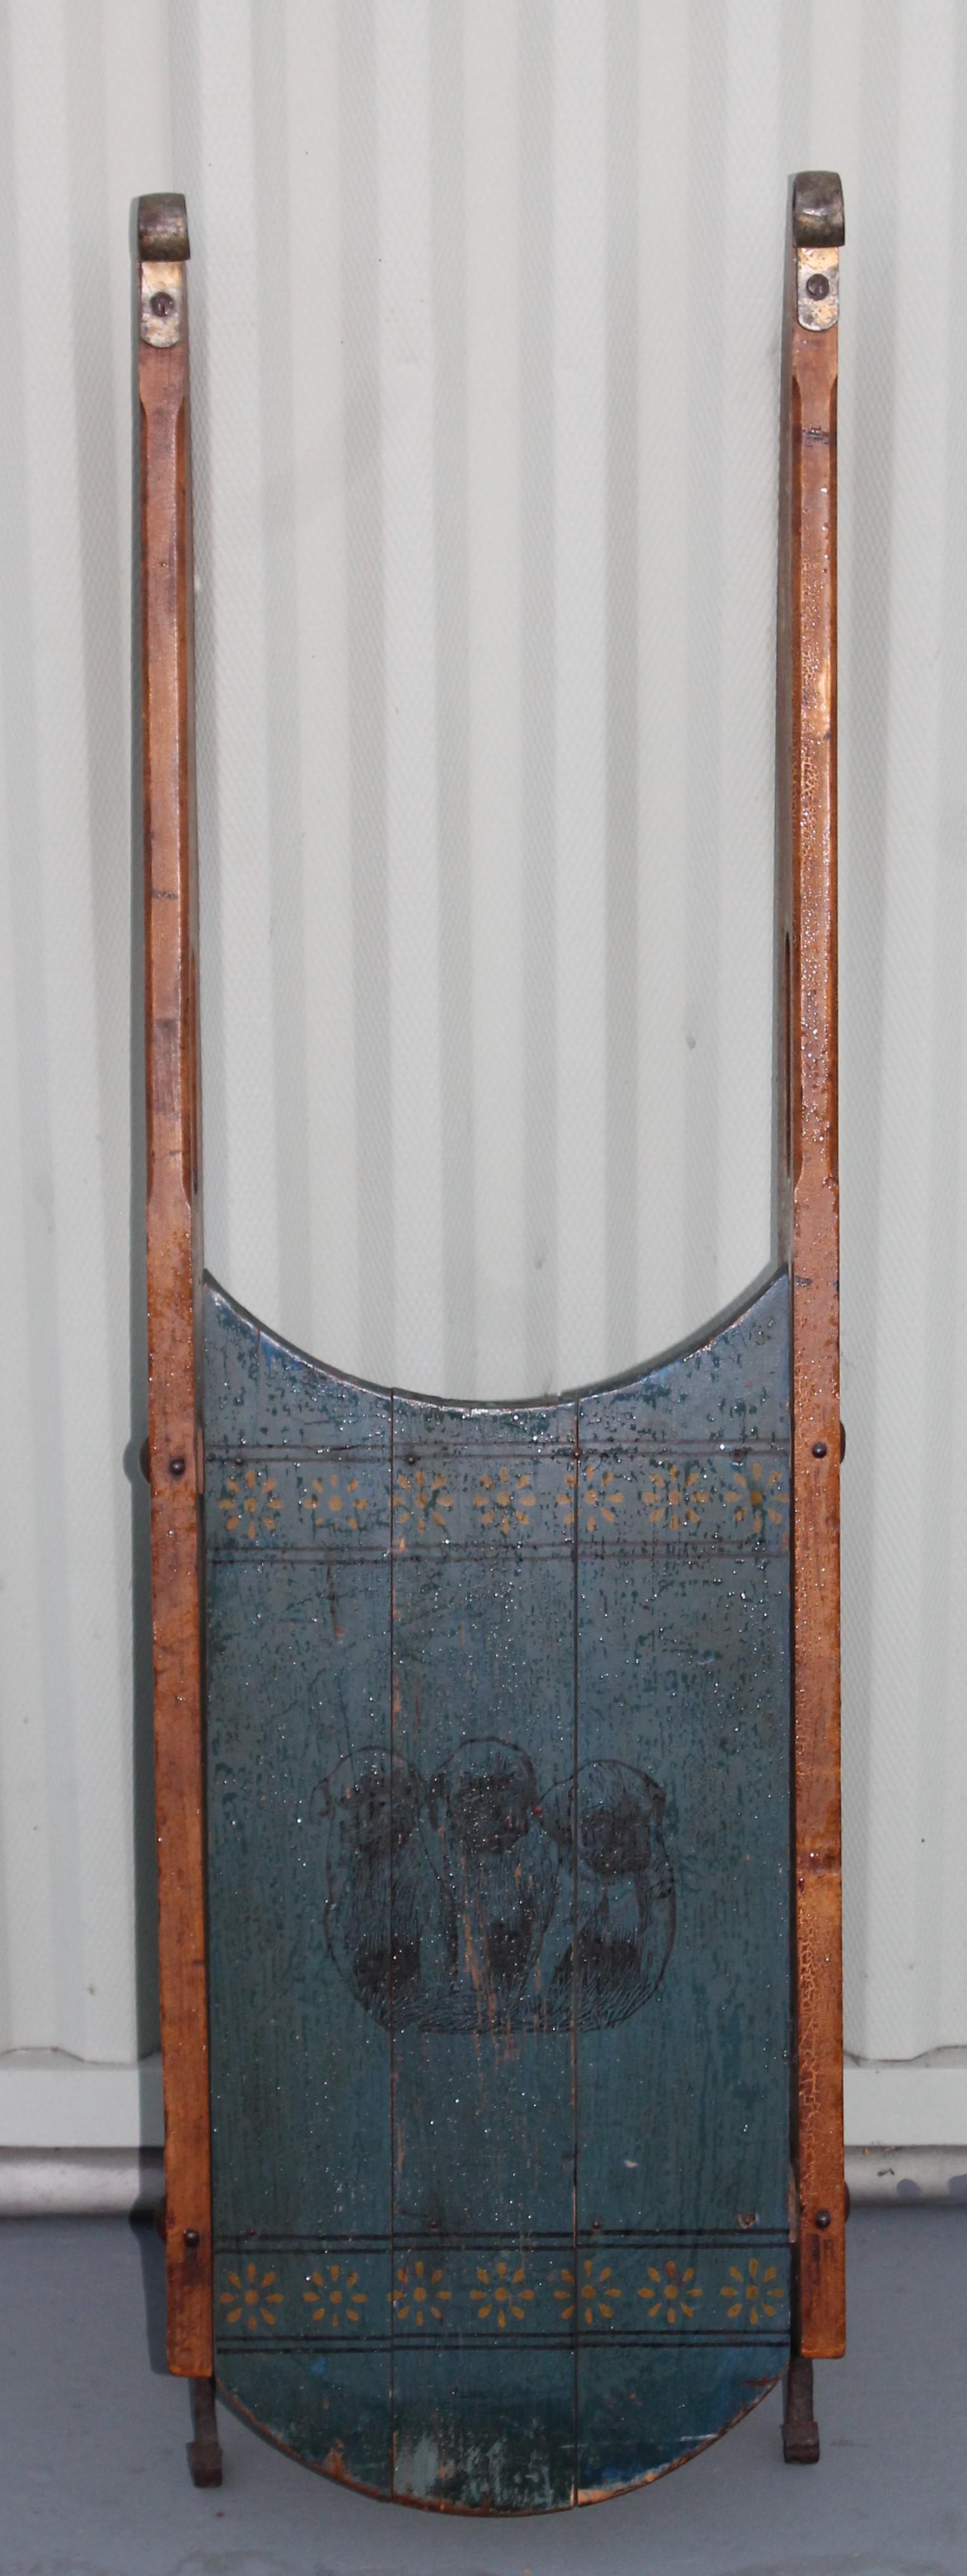 19th century original blue painted sled with three painted pugs (dogs) on the center top of the sled. There are manufacturer PMC maker marks on the side. 
On the base Paris Manufacture Company from the state of Maine. No. #6 South Pacific, Maine.